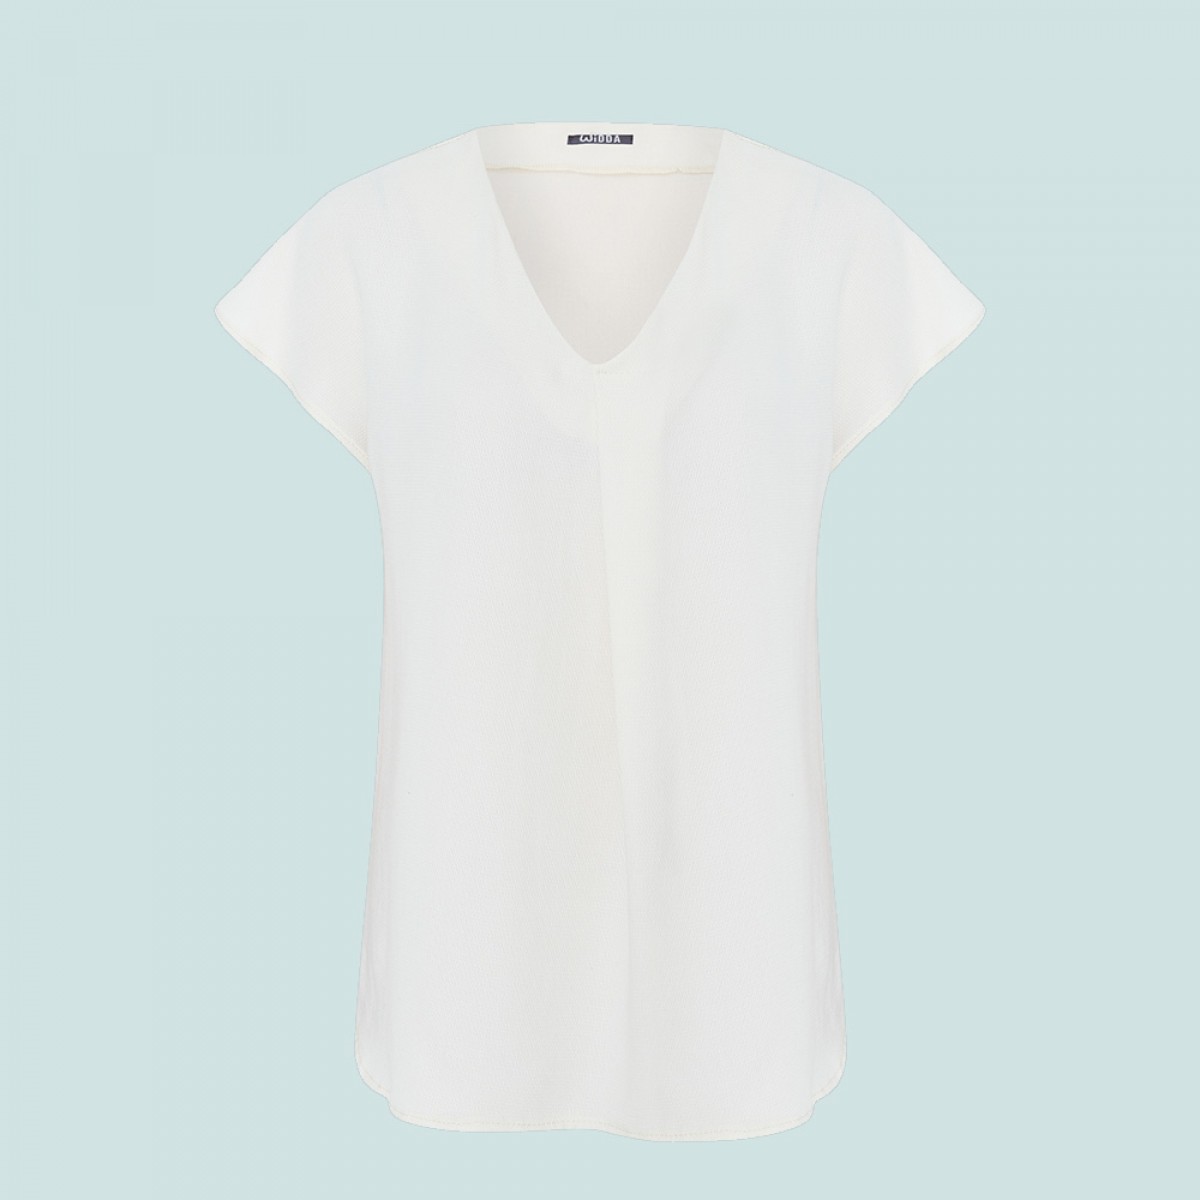 BLUSE “OFF BEAT” AUS TENCEL IN OFFWHITE